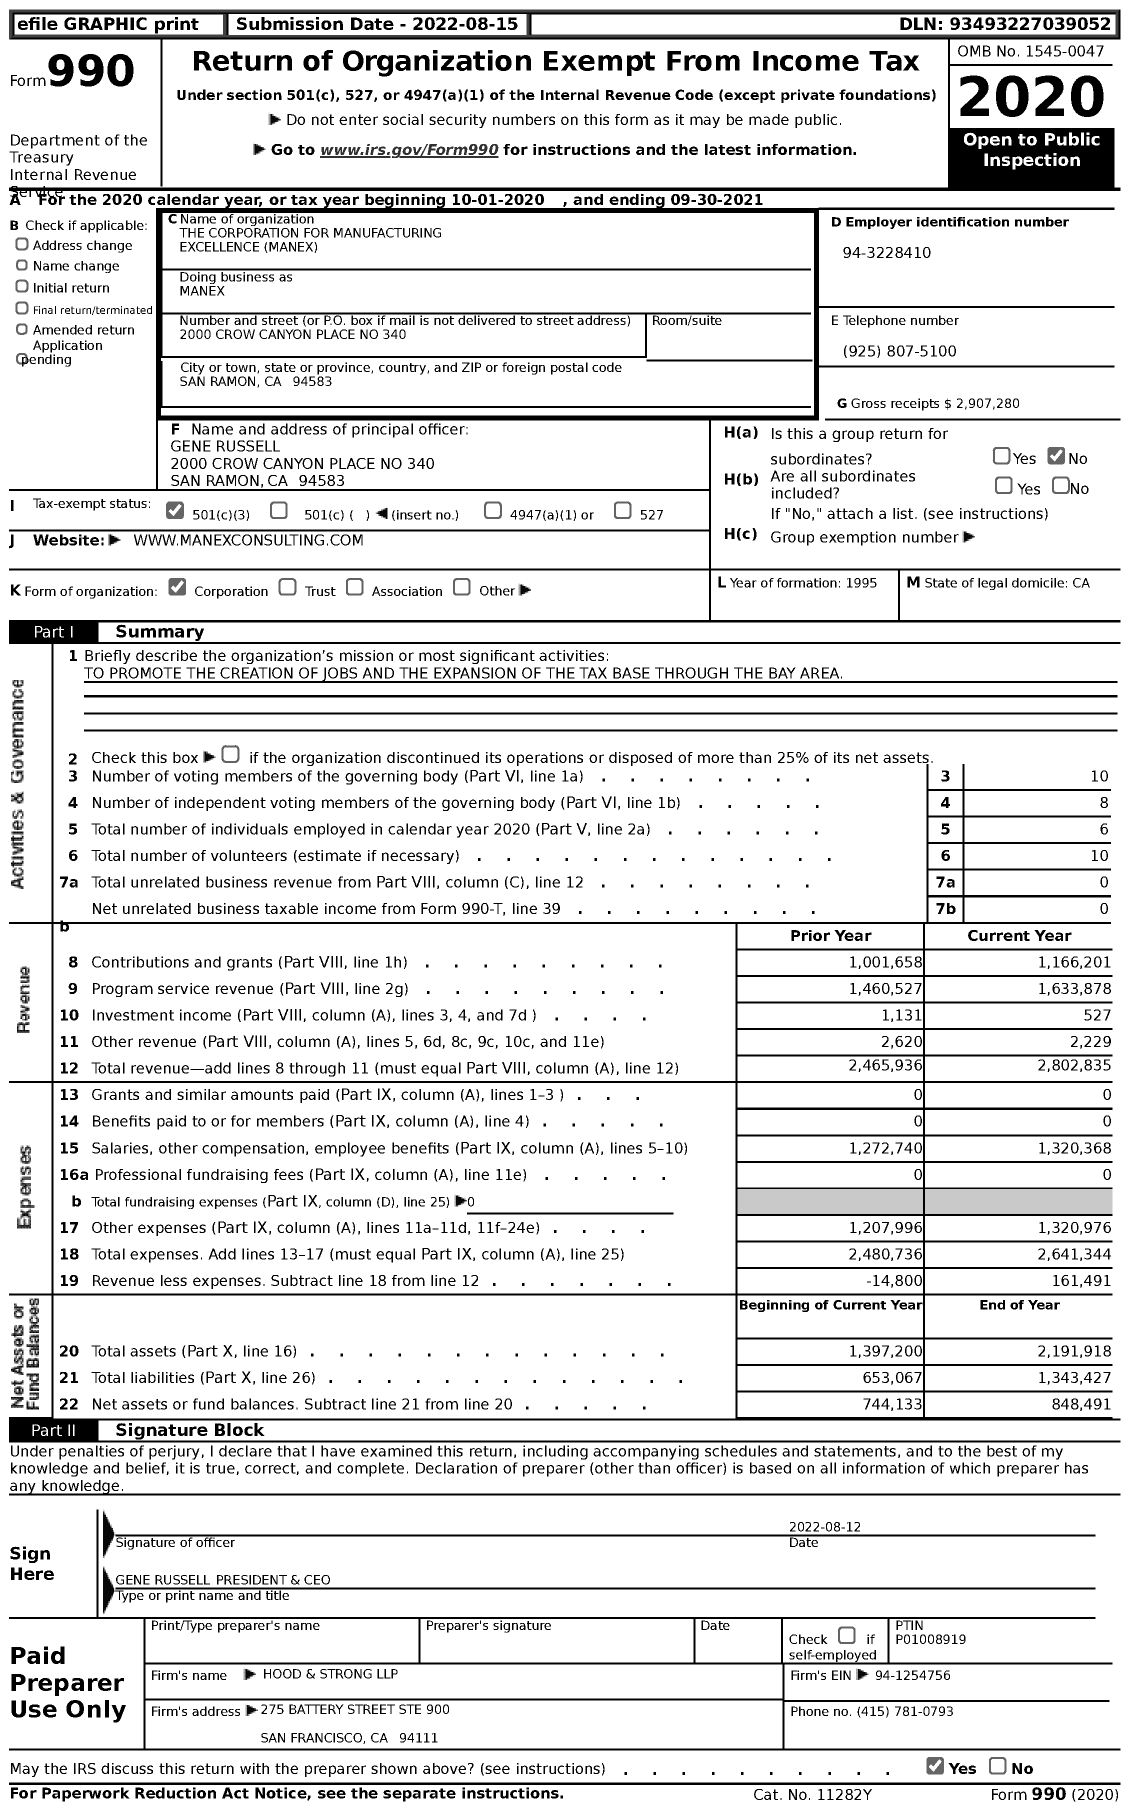 Image of first page of 2020 Form 990 for The Corporation for Manufacturing Excellence Manex (Manex)